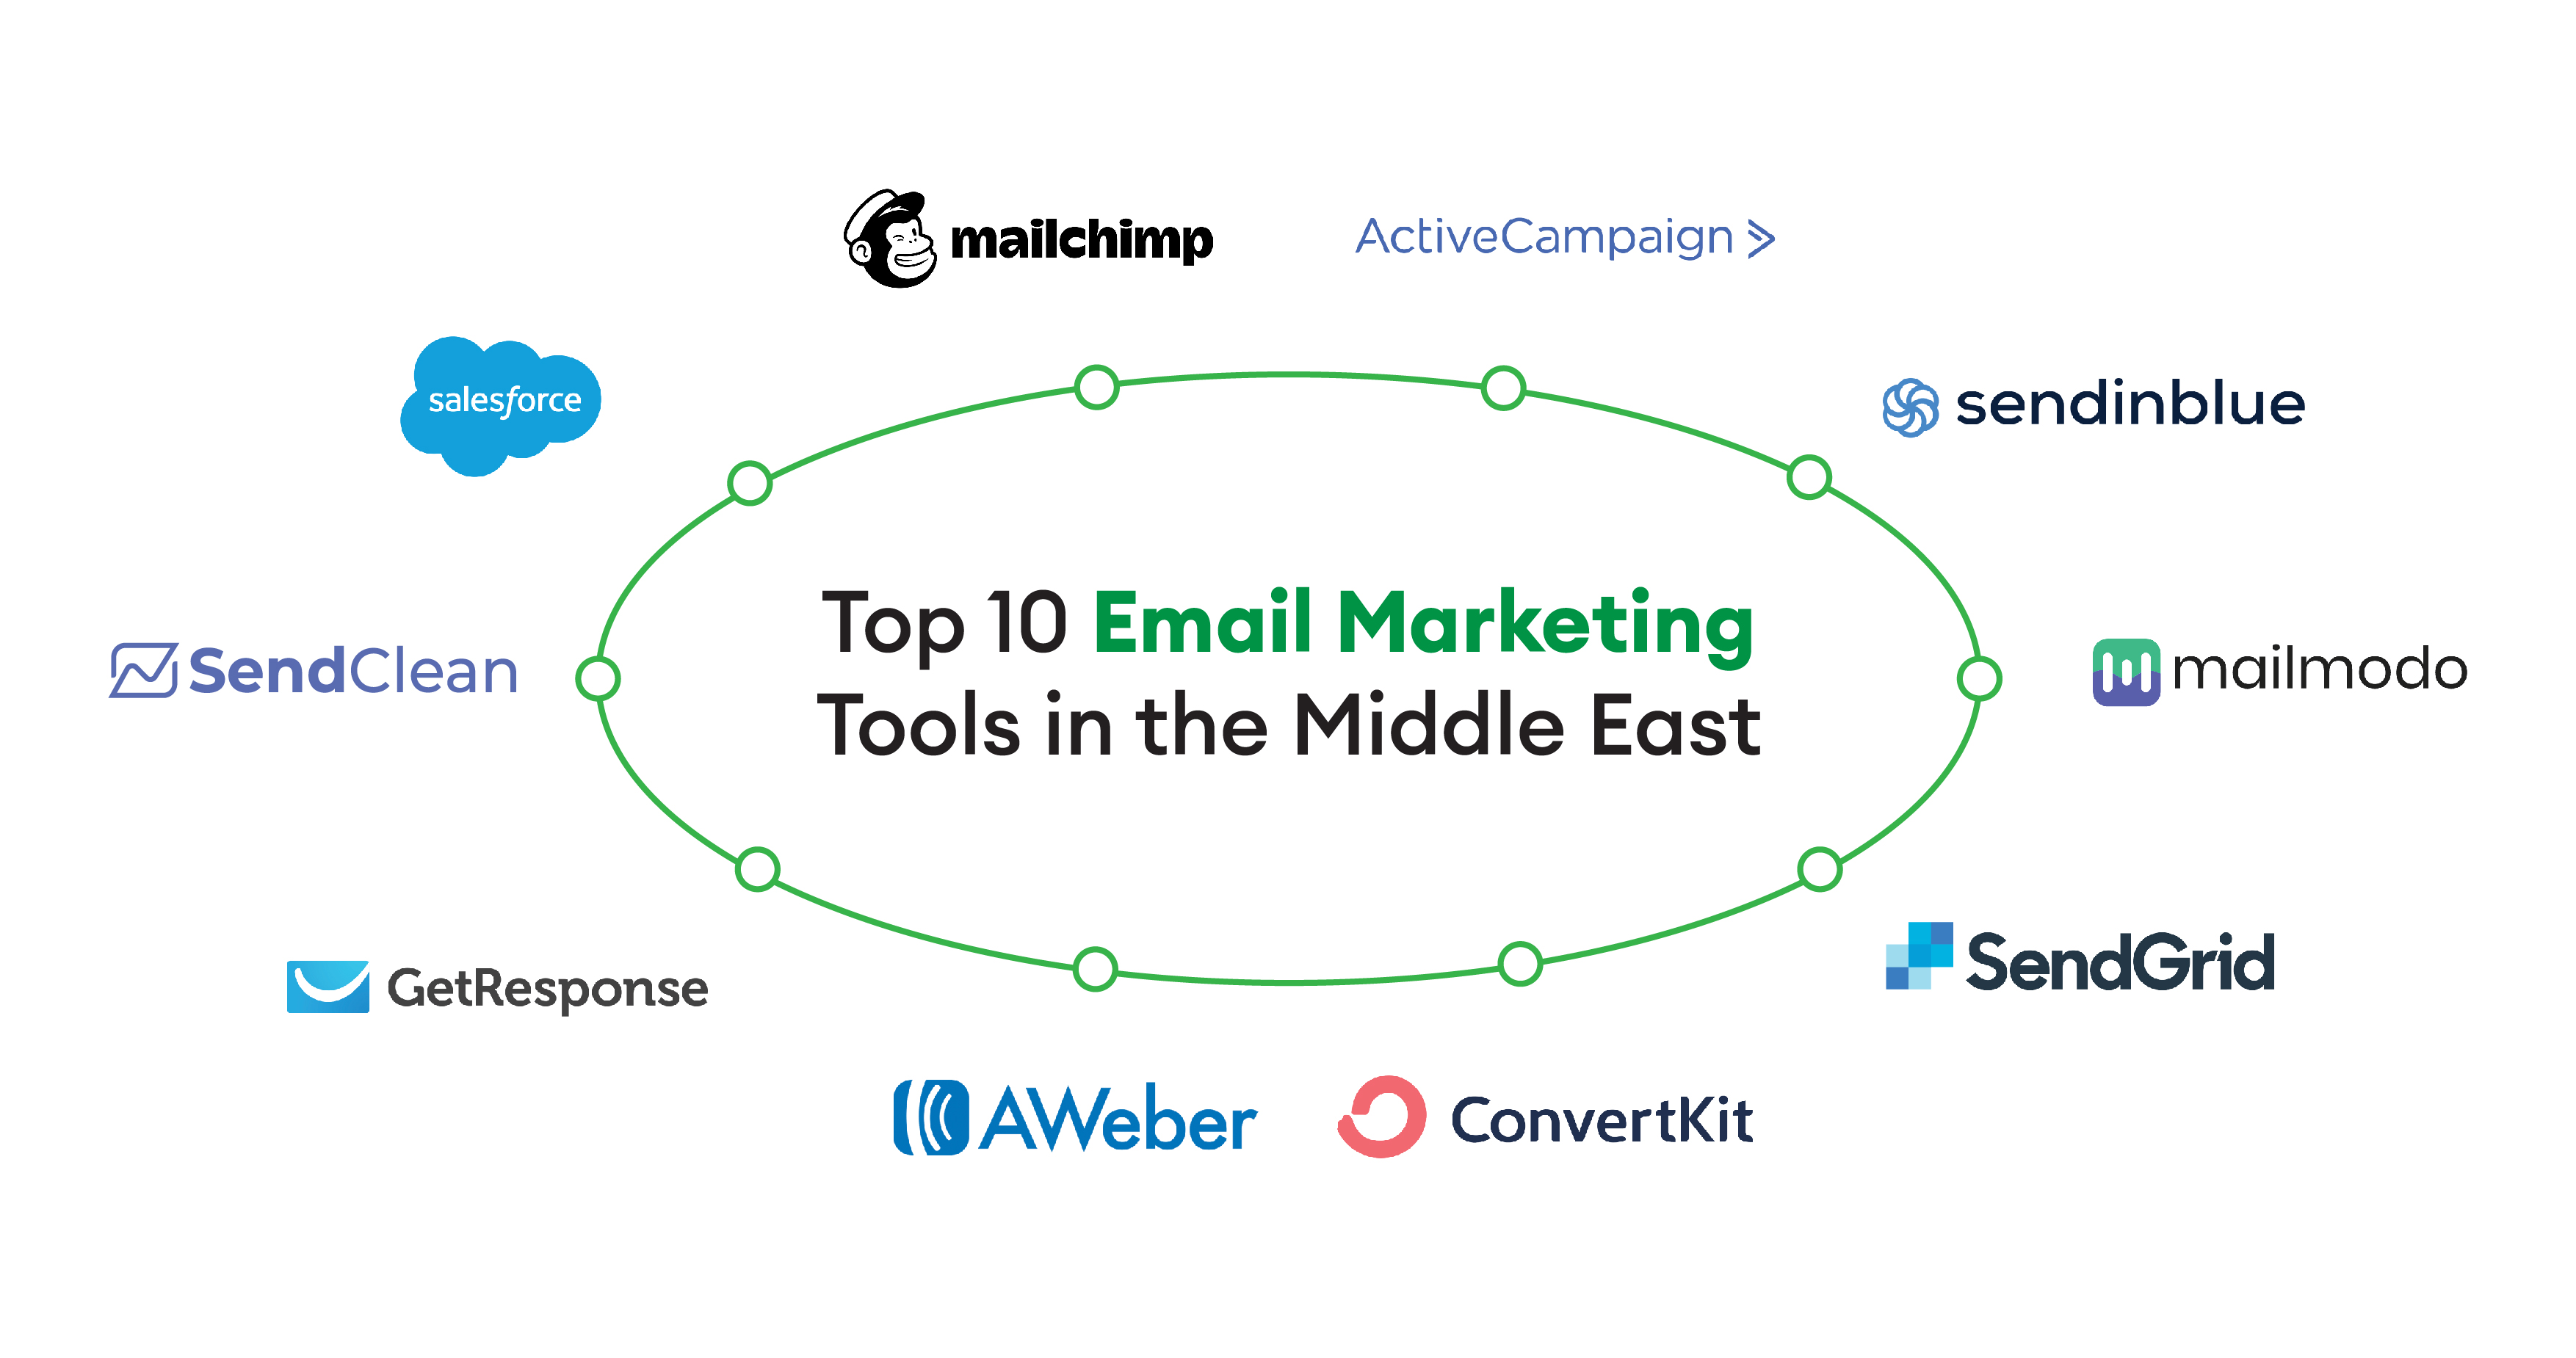 Top 10 Email Marketing Tools in the Middle East